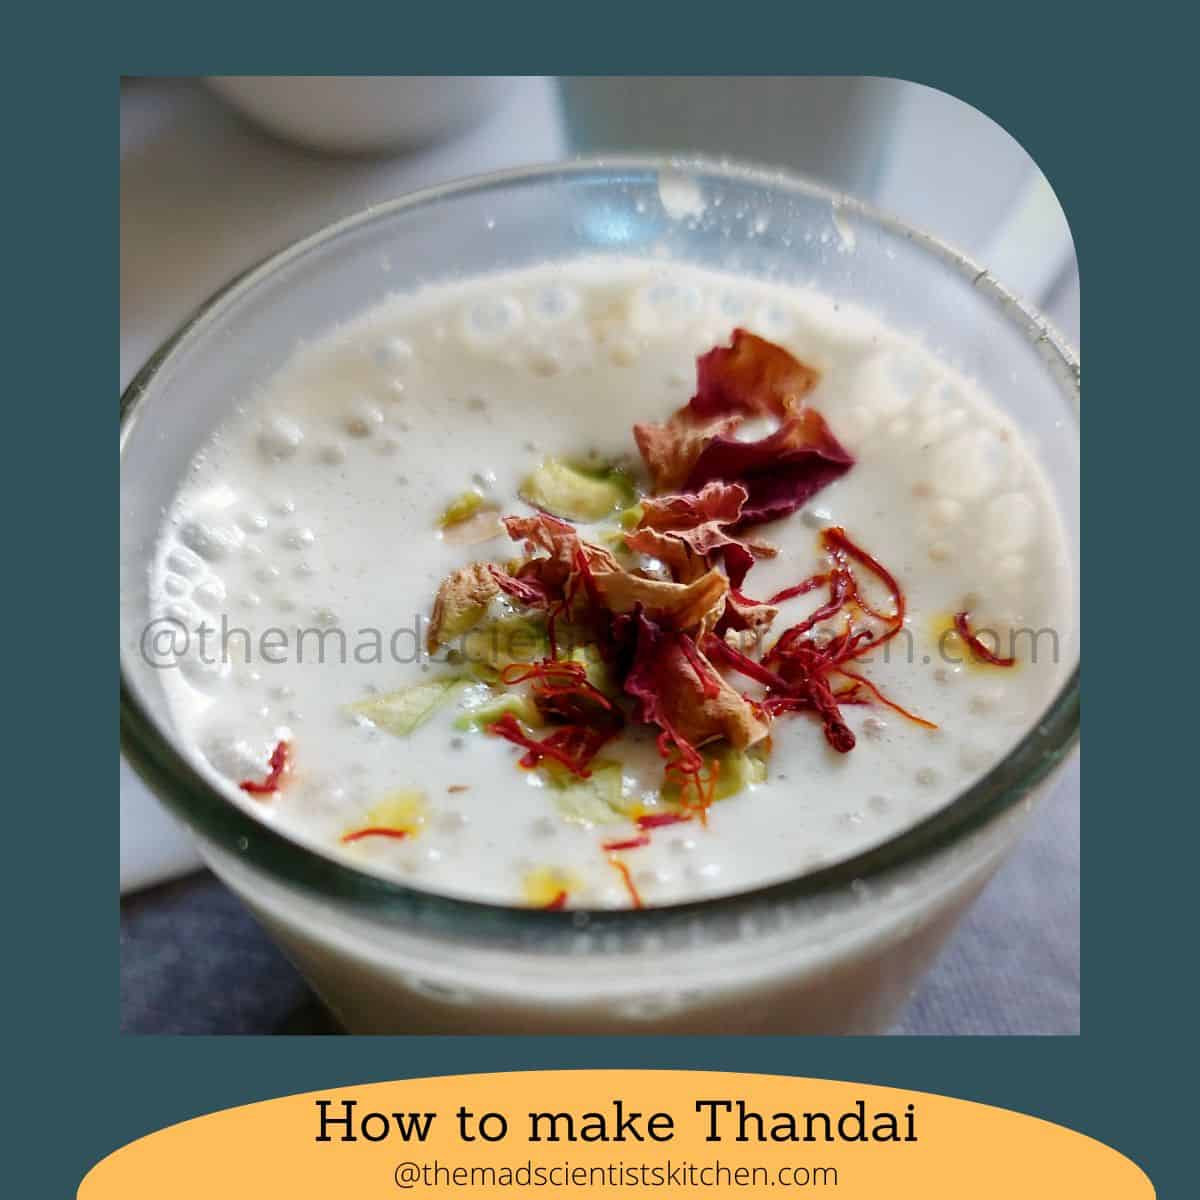 A glass of thandai, an Indian cold drink